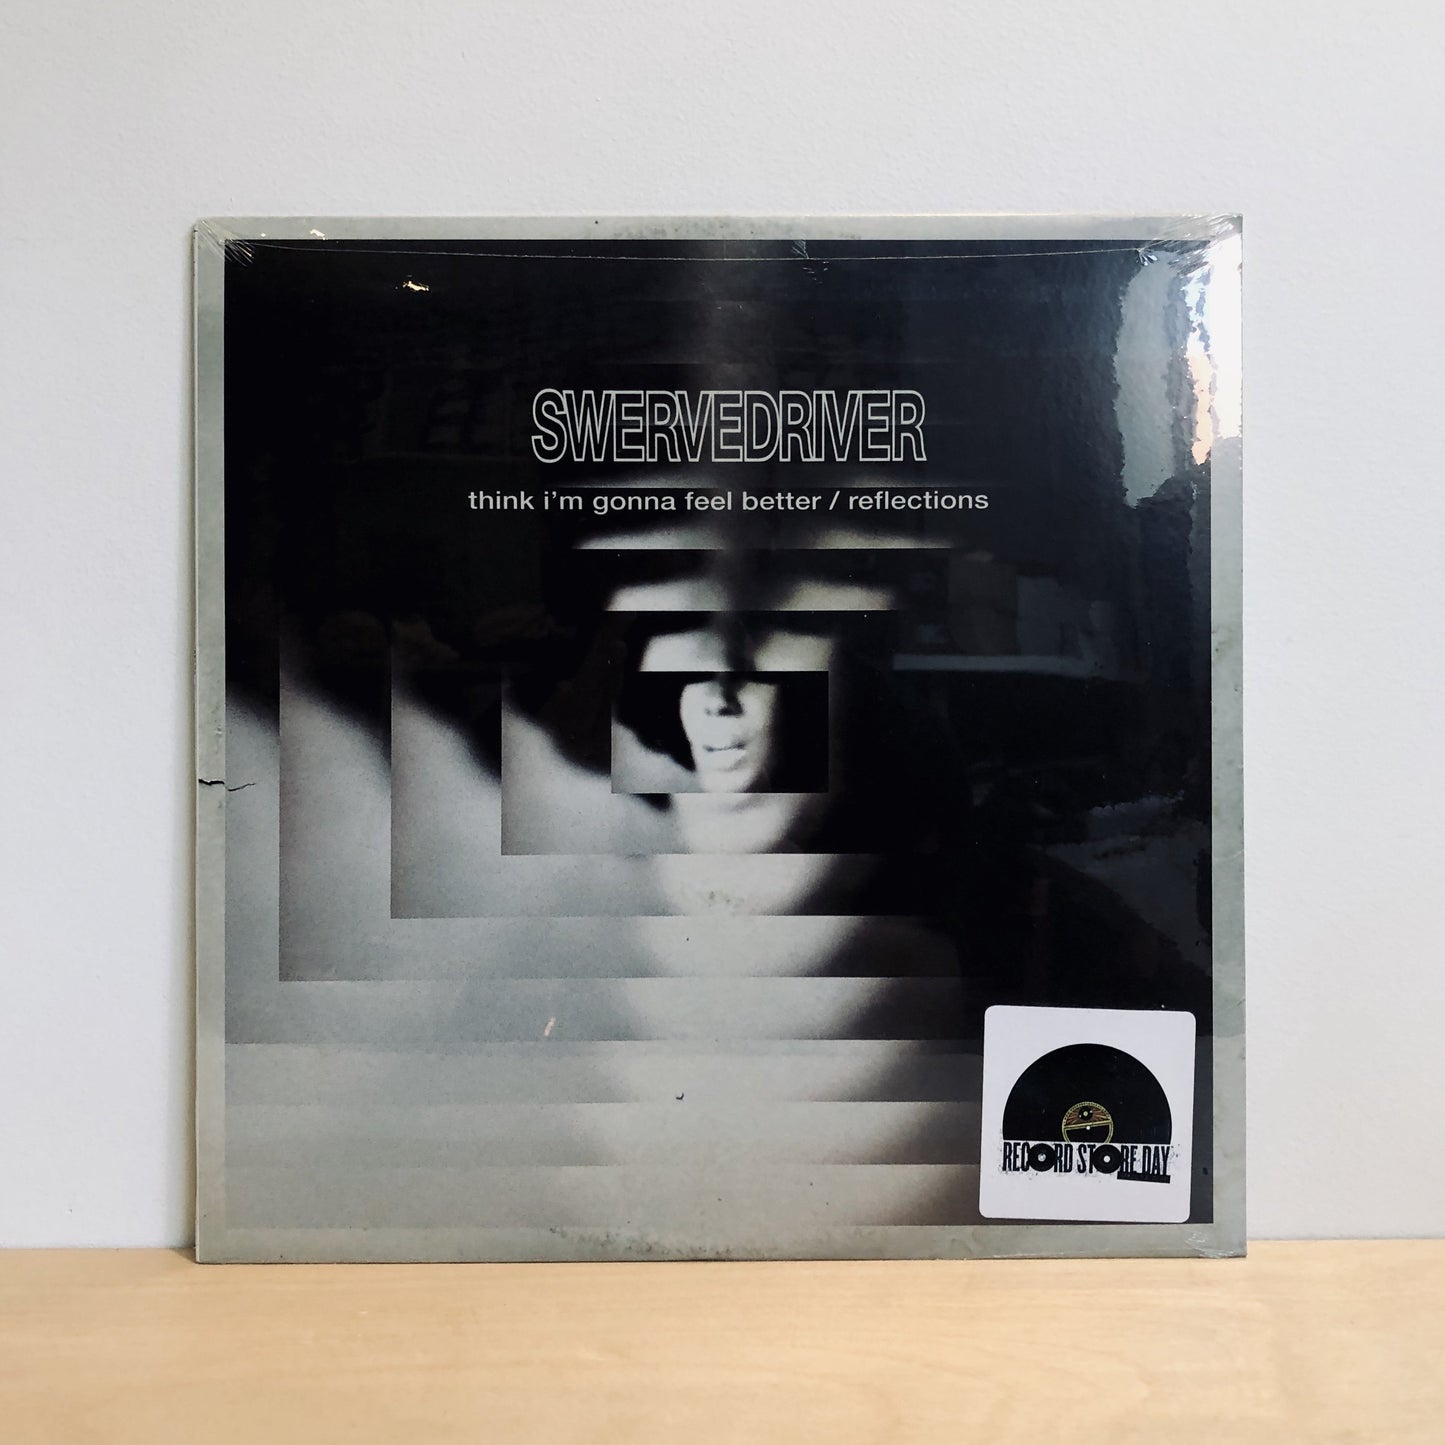 Swervedriver - Think I'm Gonna Feel Better b/w Reflections [12''] (Clear Vinyl, limited to 1500, indie exclusive)